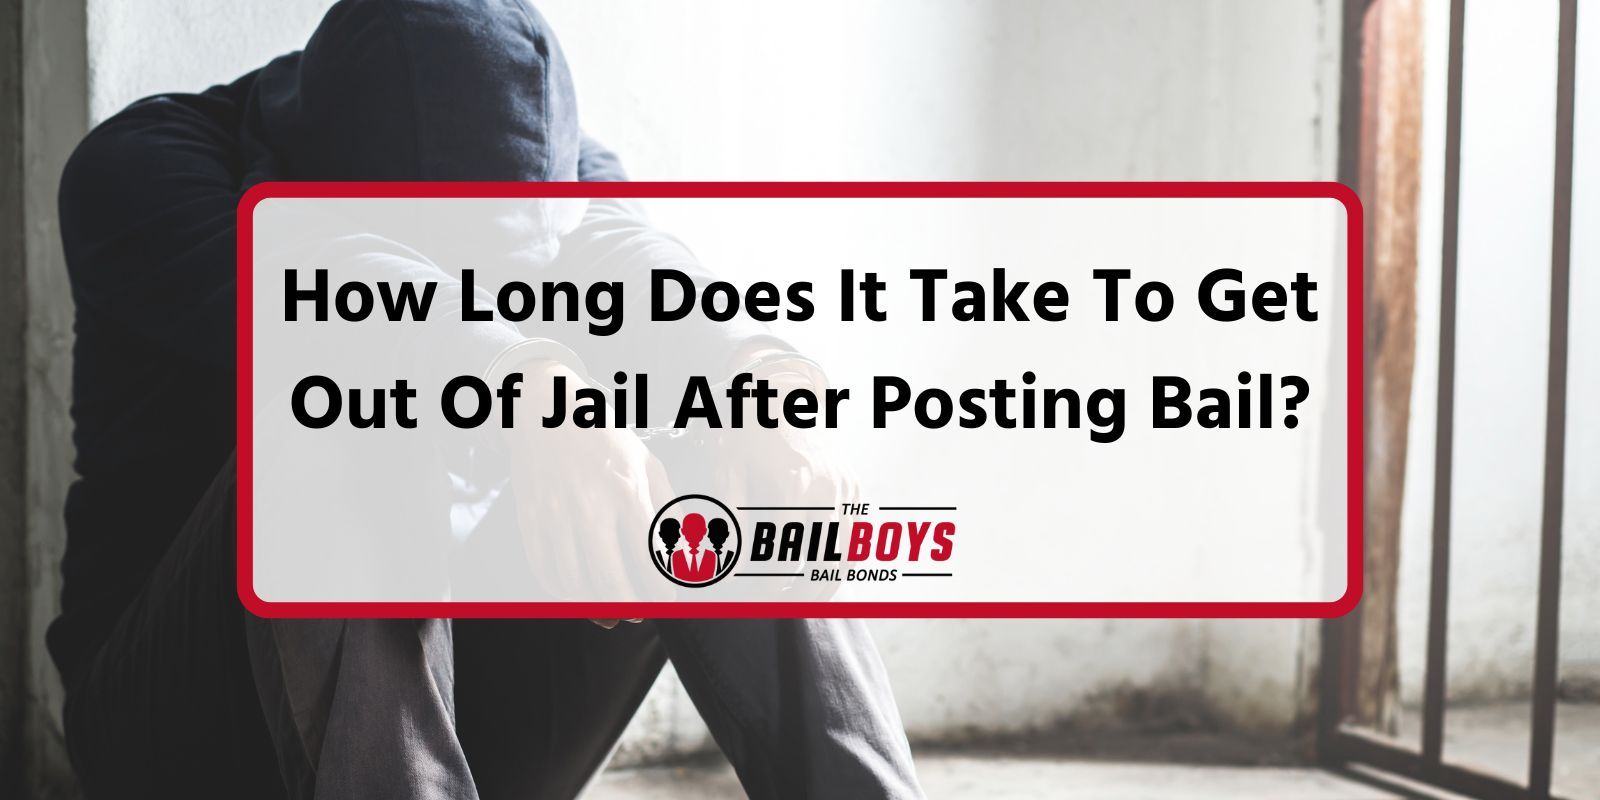 How long does it take to get out of jail after posting bail?